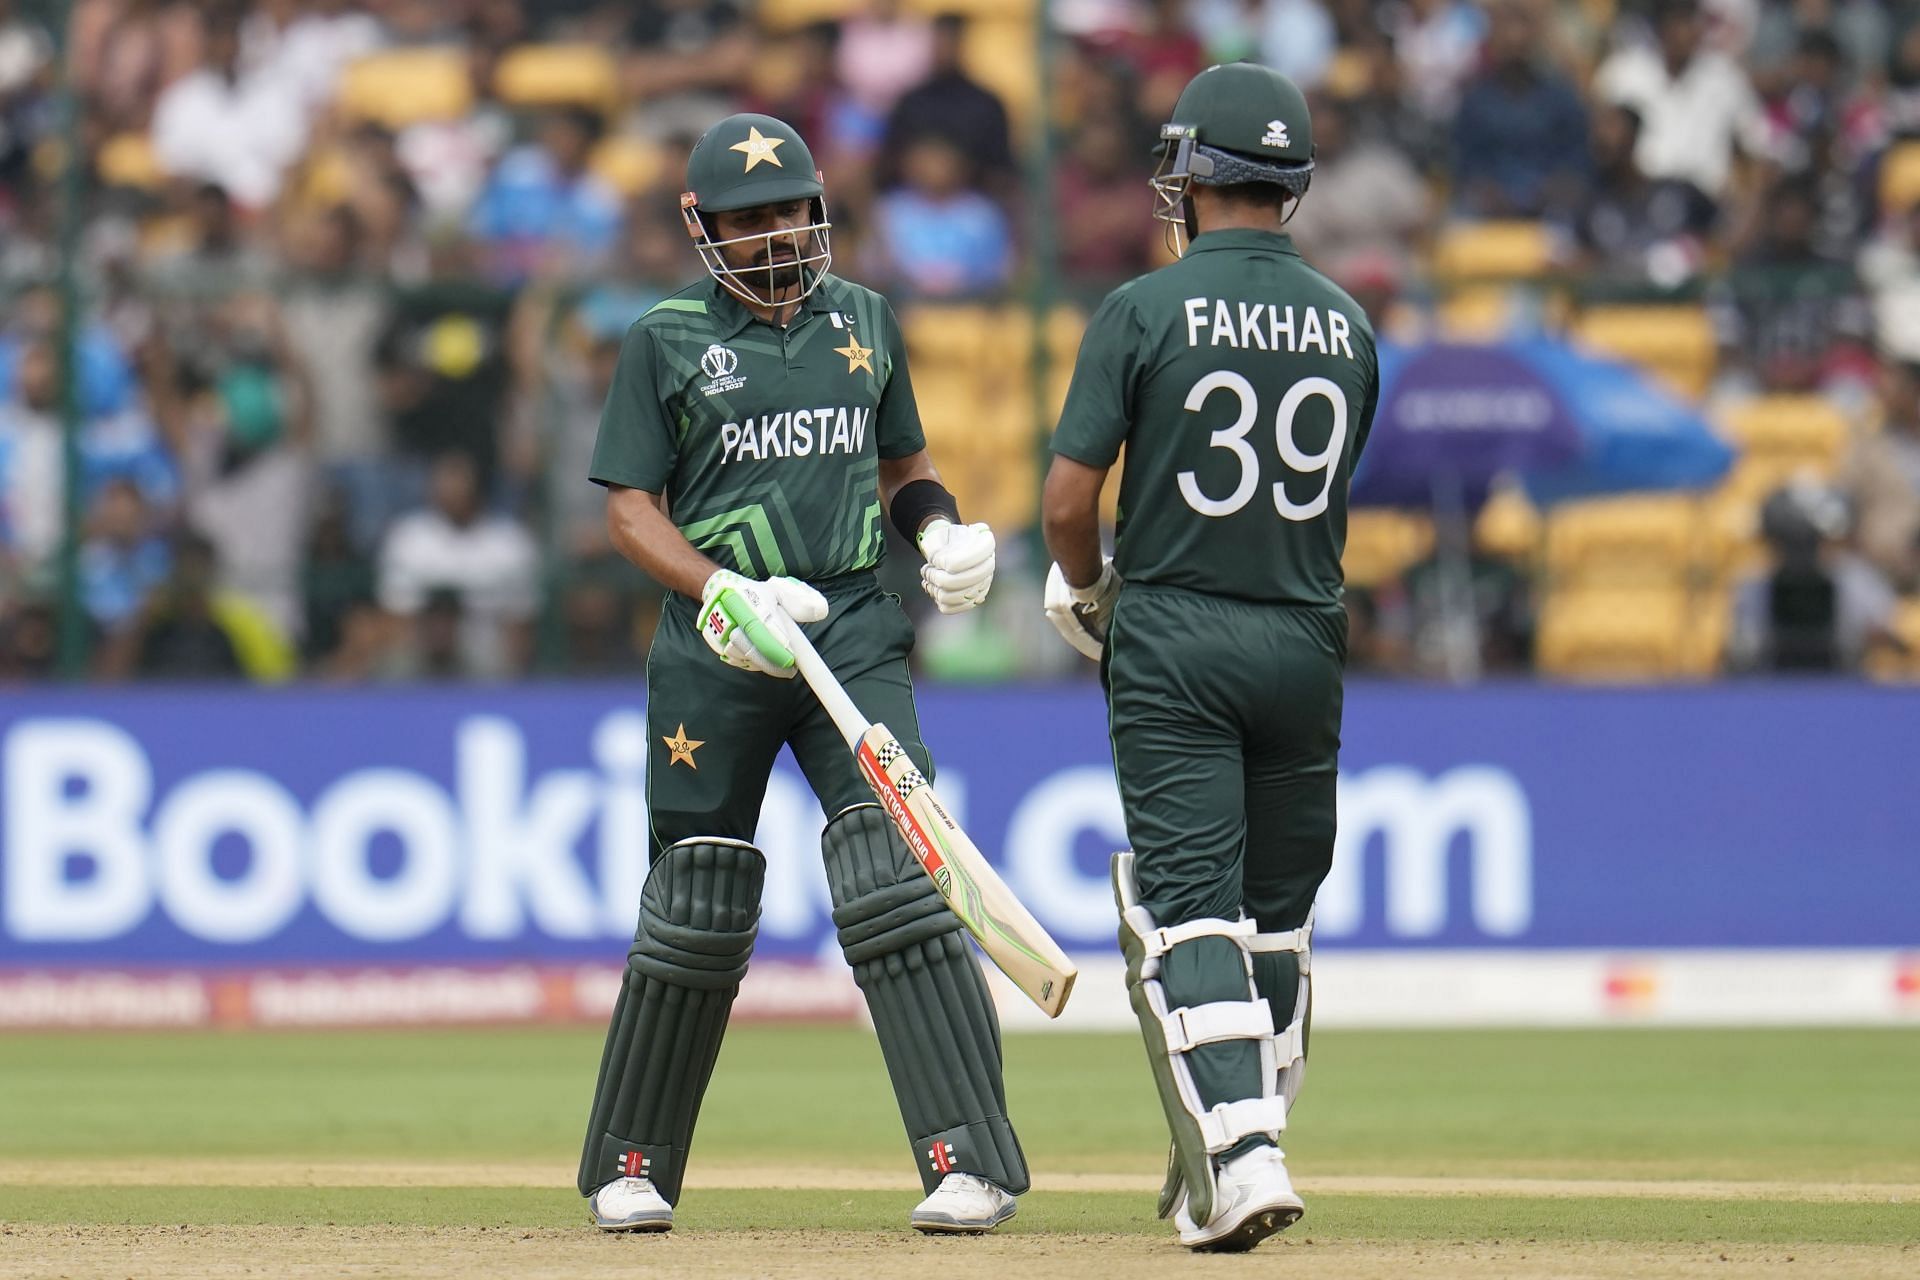 Babar Azam was primarily content with giving the strike to Fakhar Zaman. [P/C: AP]